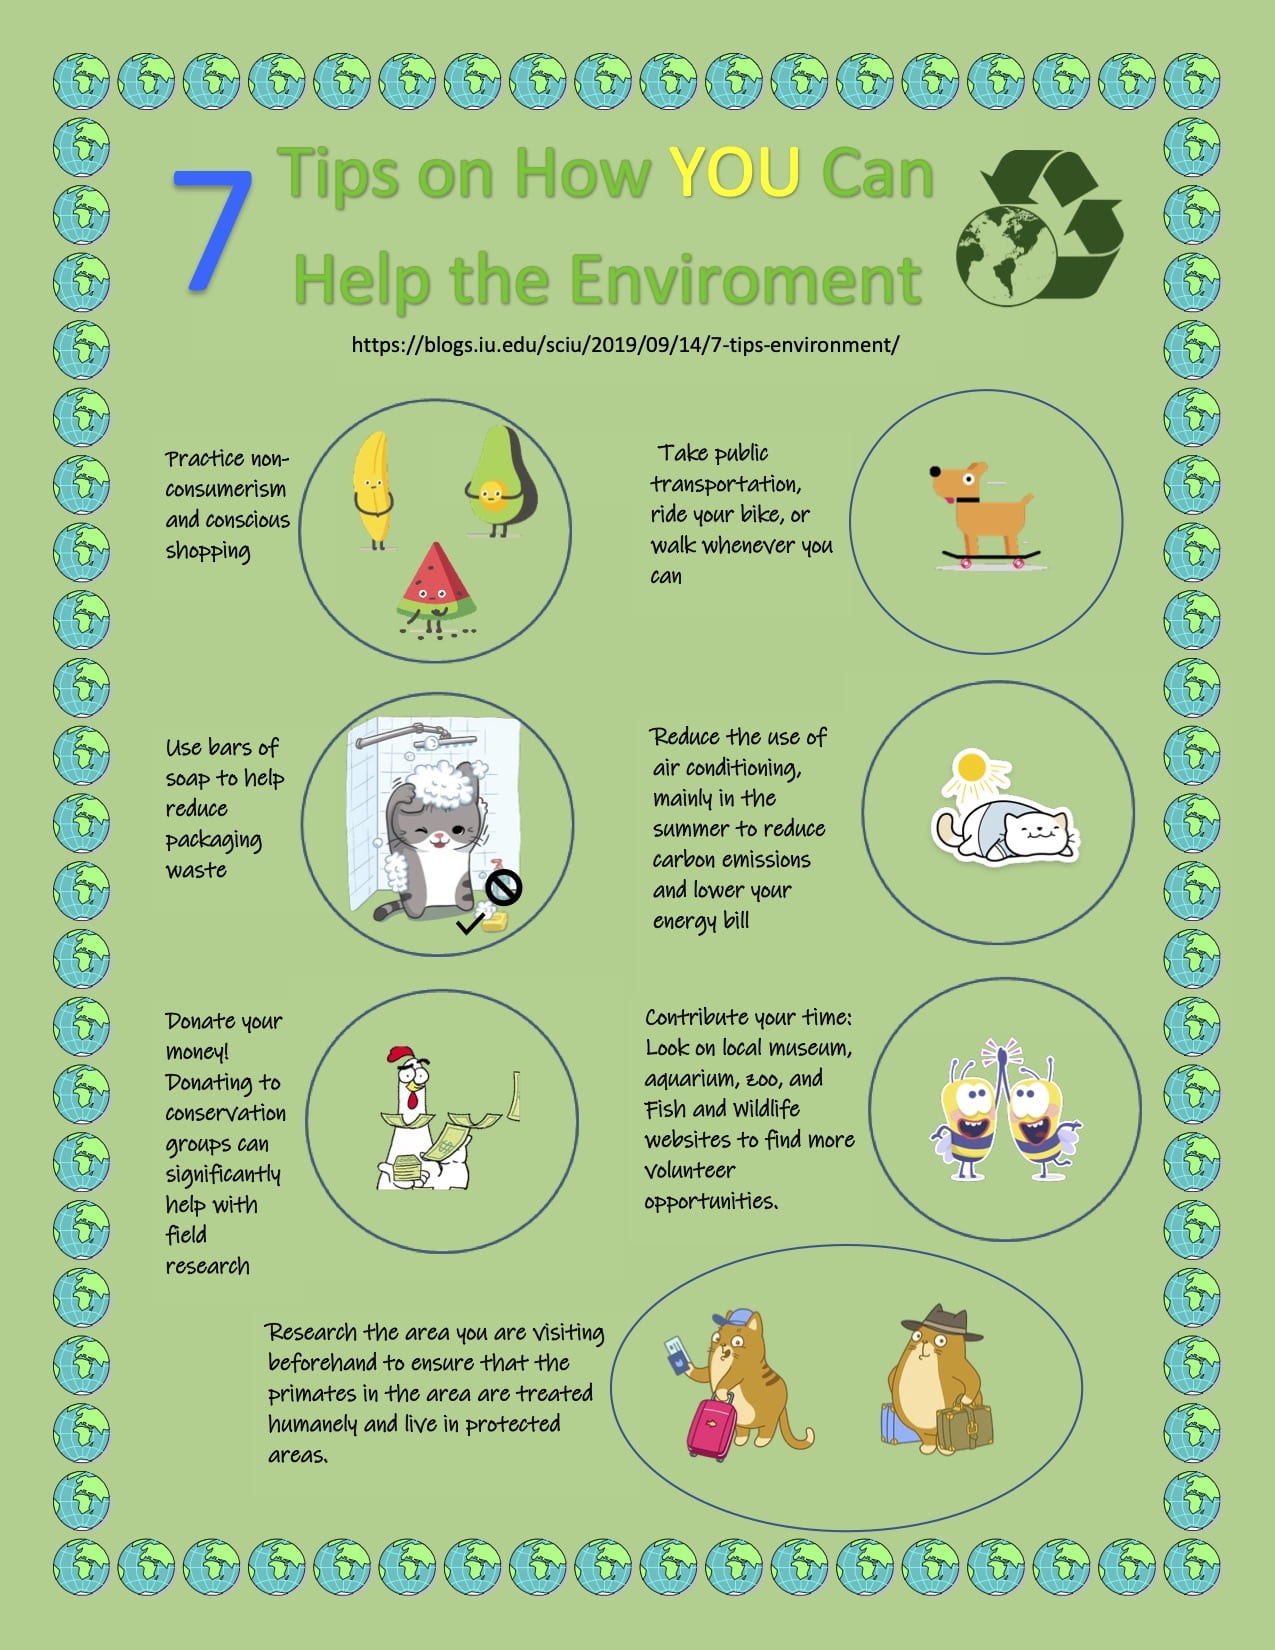 infographic about environment friendly tips. to read the original post go to https://blogs.iu.edu/sciu/2019/09/14/7-tips-environment/